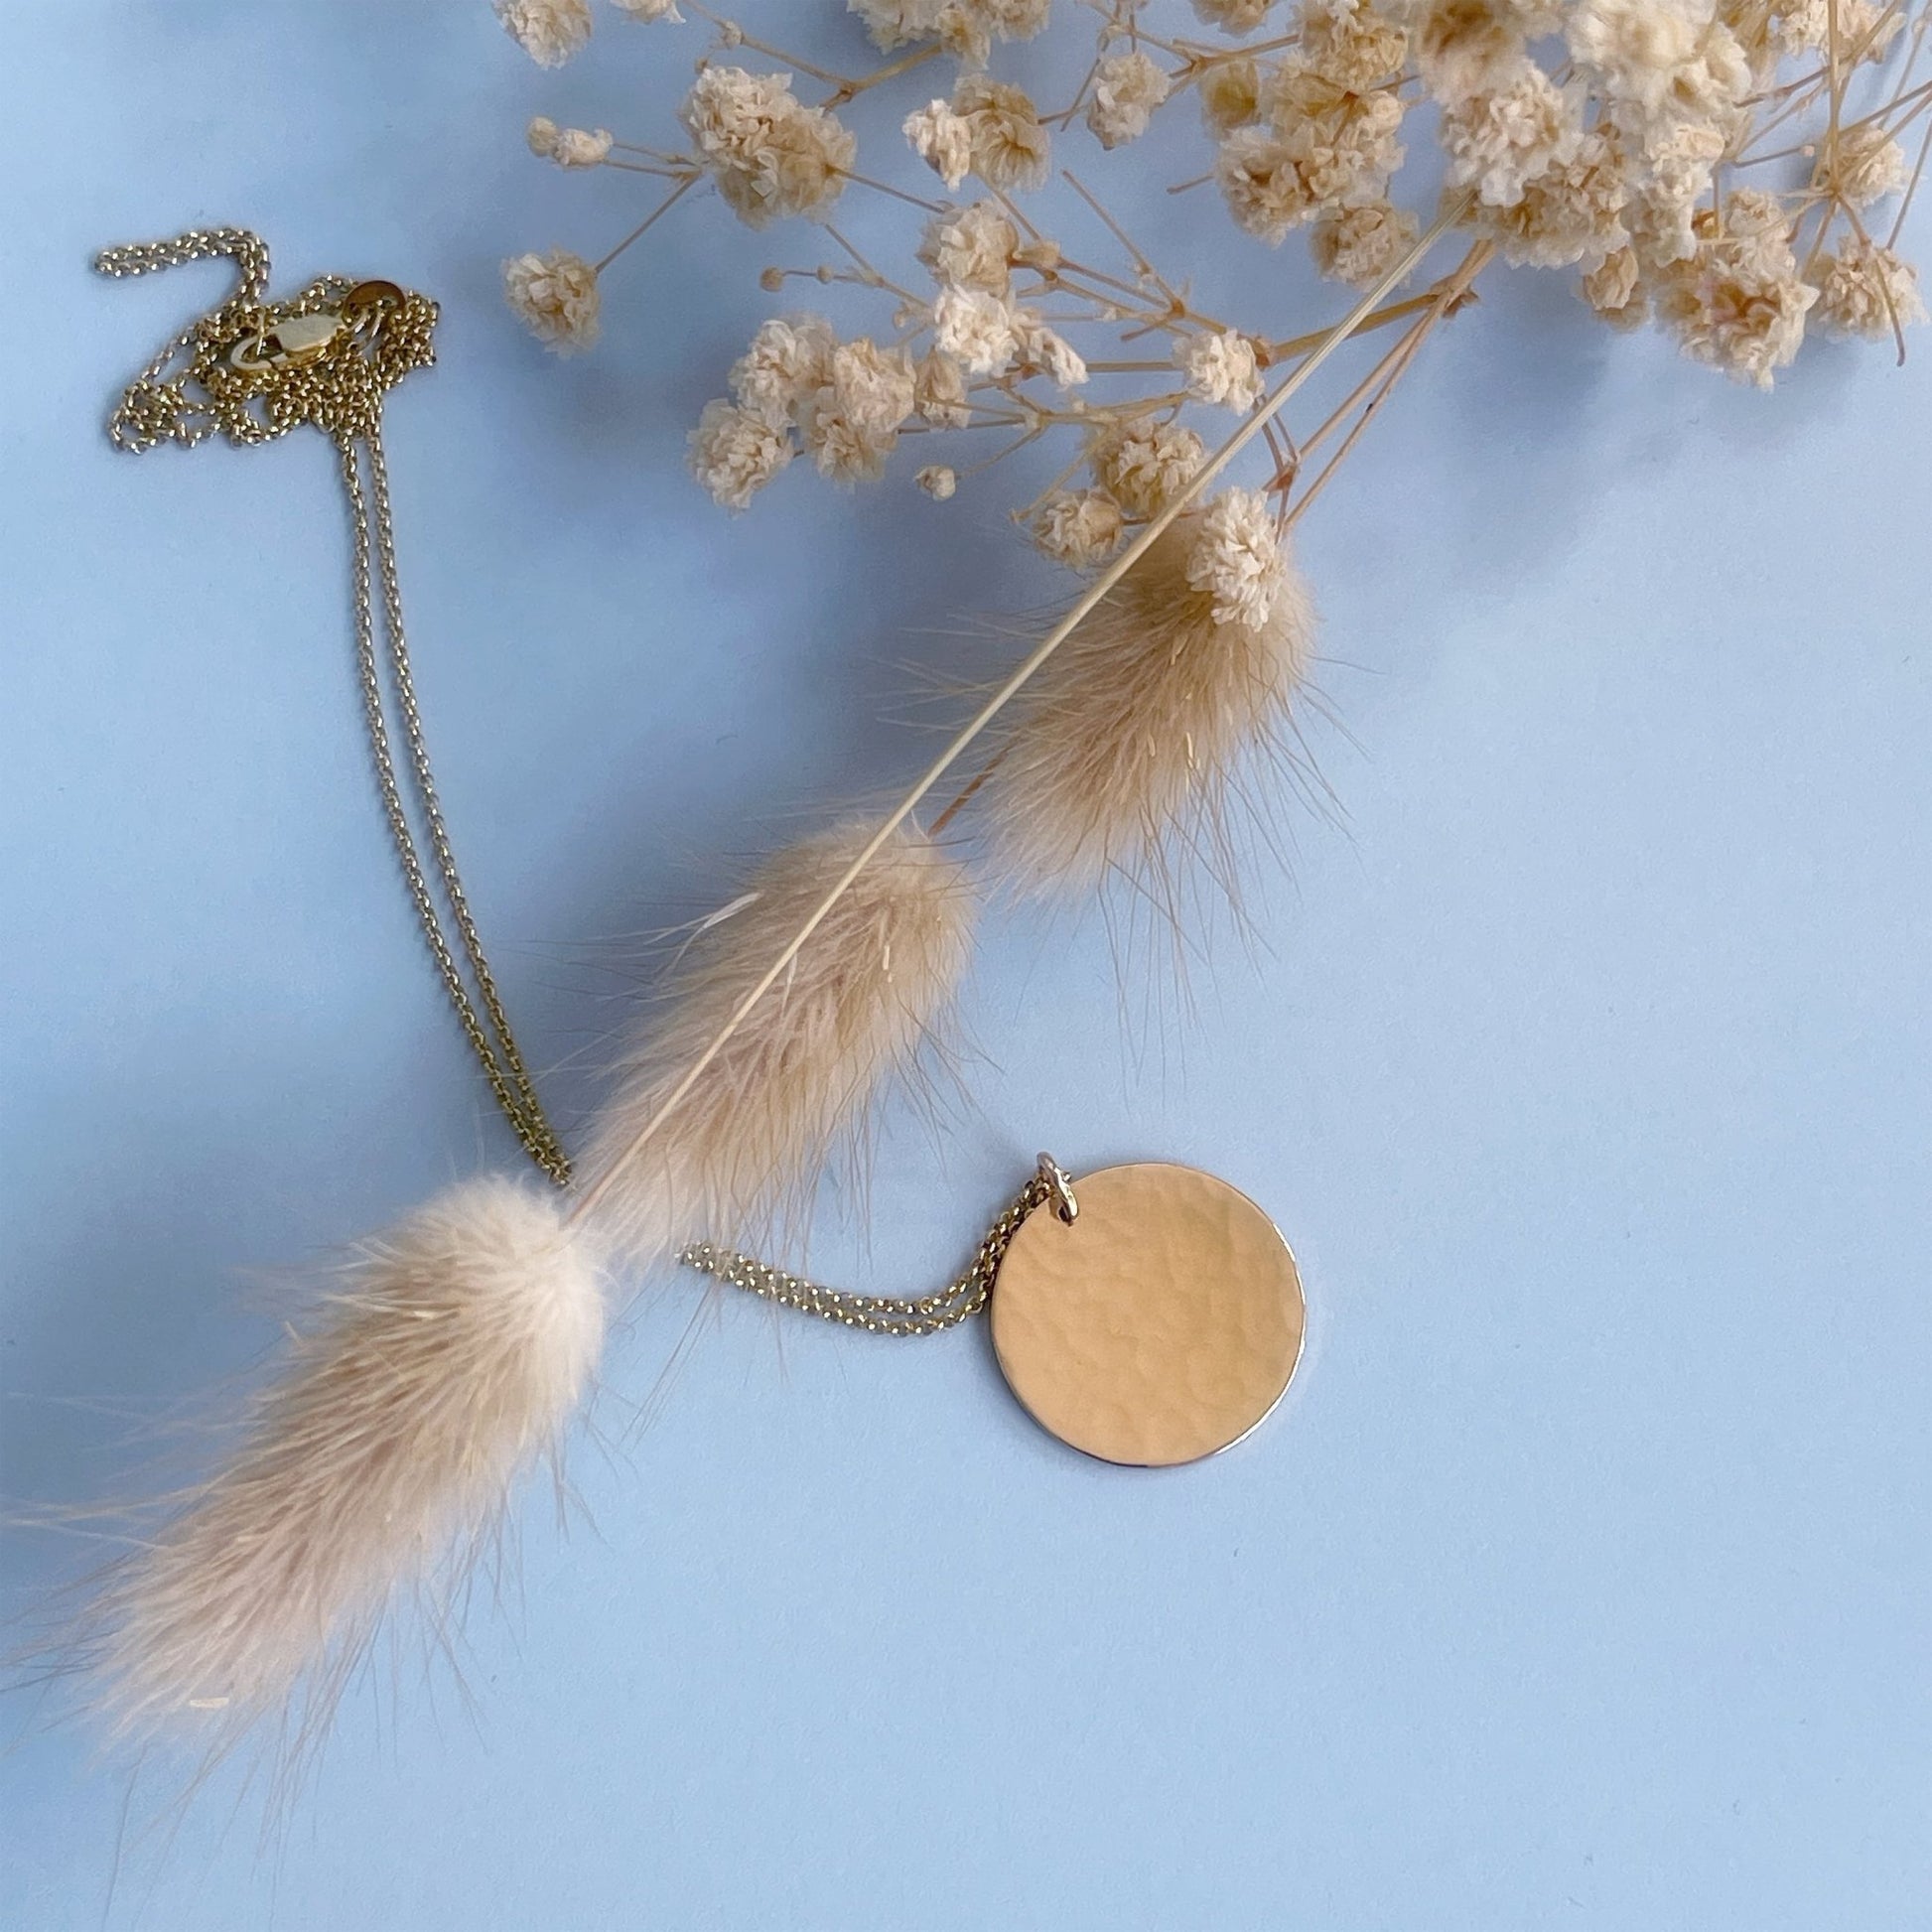 19mm diameter 14k gold coin necklace for women, on a pale blue background, with dried, cream-coloured flowers